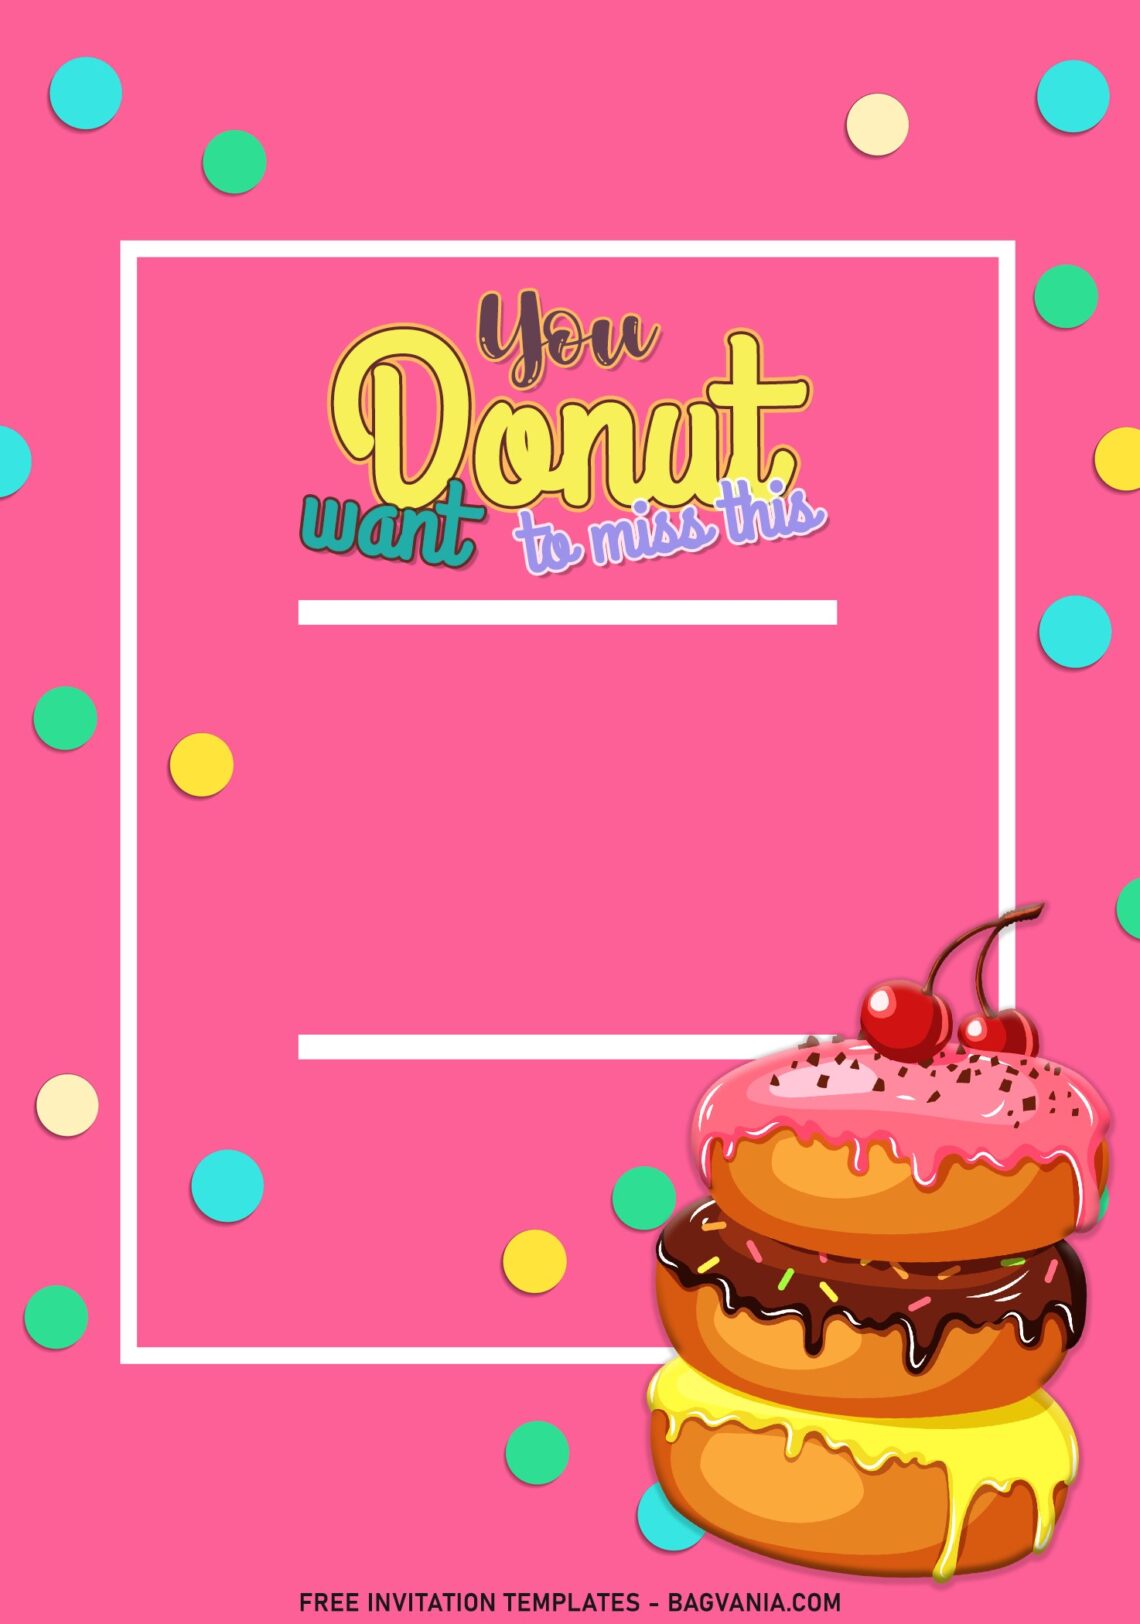 7+ Donut And Sprinkle Invitation Templates For Your Cute Little Girl’s ...